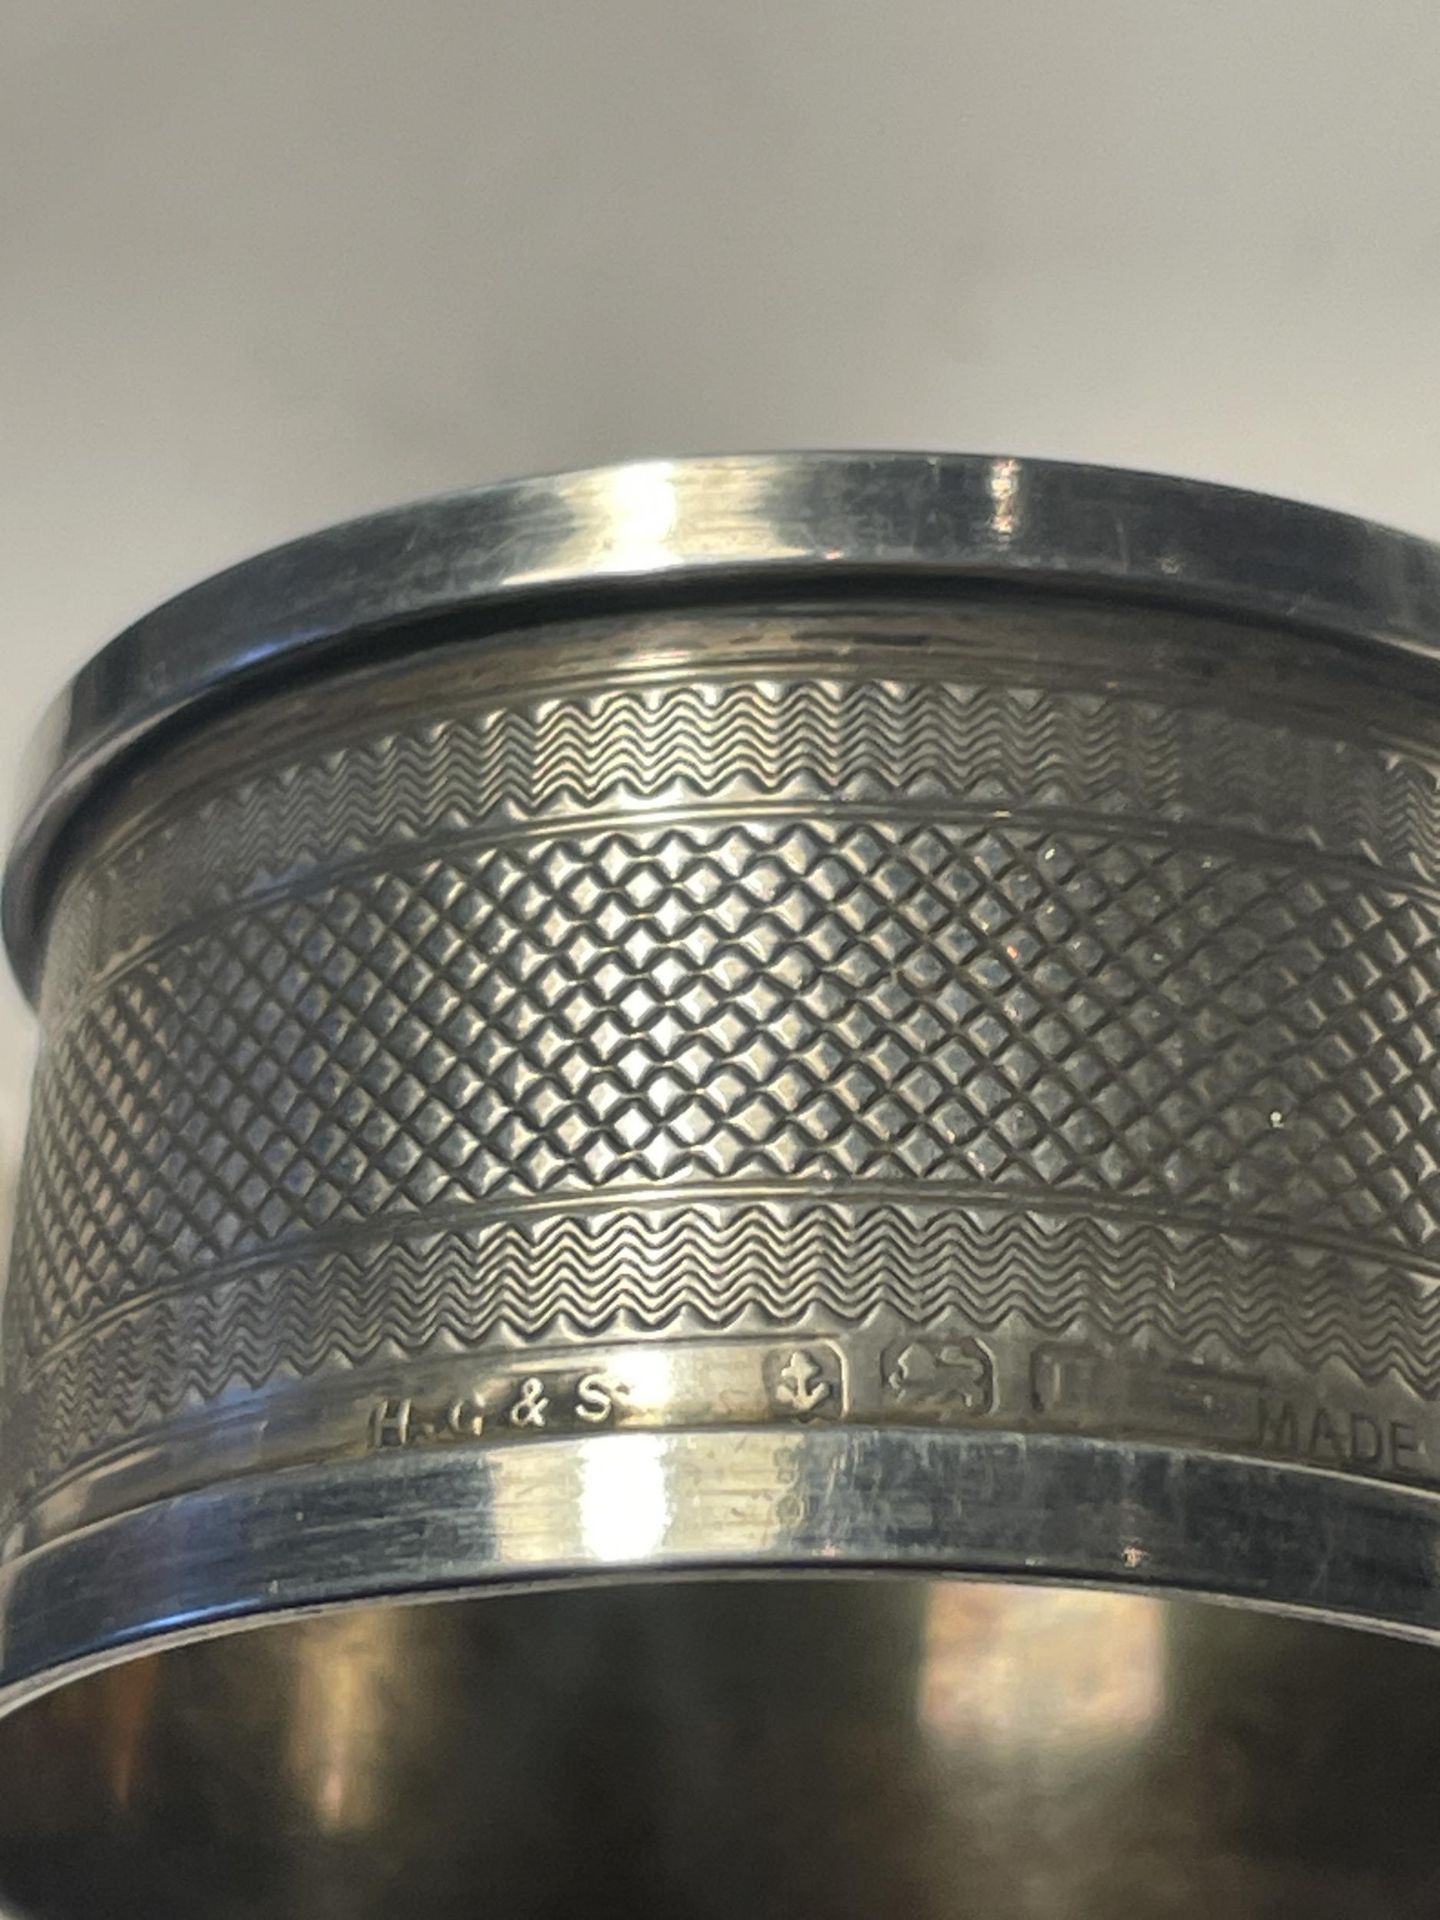 TWO HALLMARKED BIRMINGHAM SILVER ITEMS TO INCLUDE AN ENGRAVED NAPKIN RING AND AN ENGRAVED CUP - Image 4 of 4